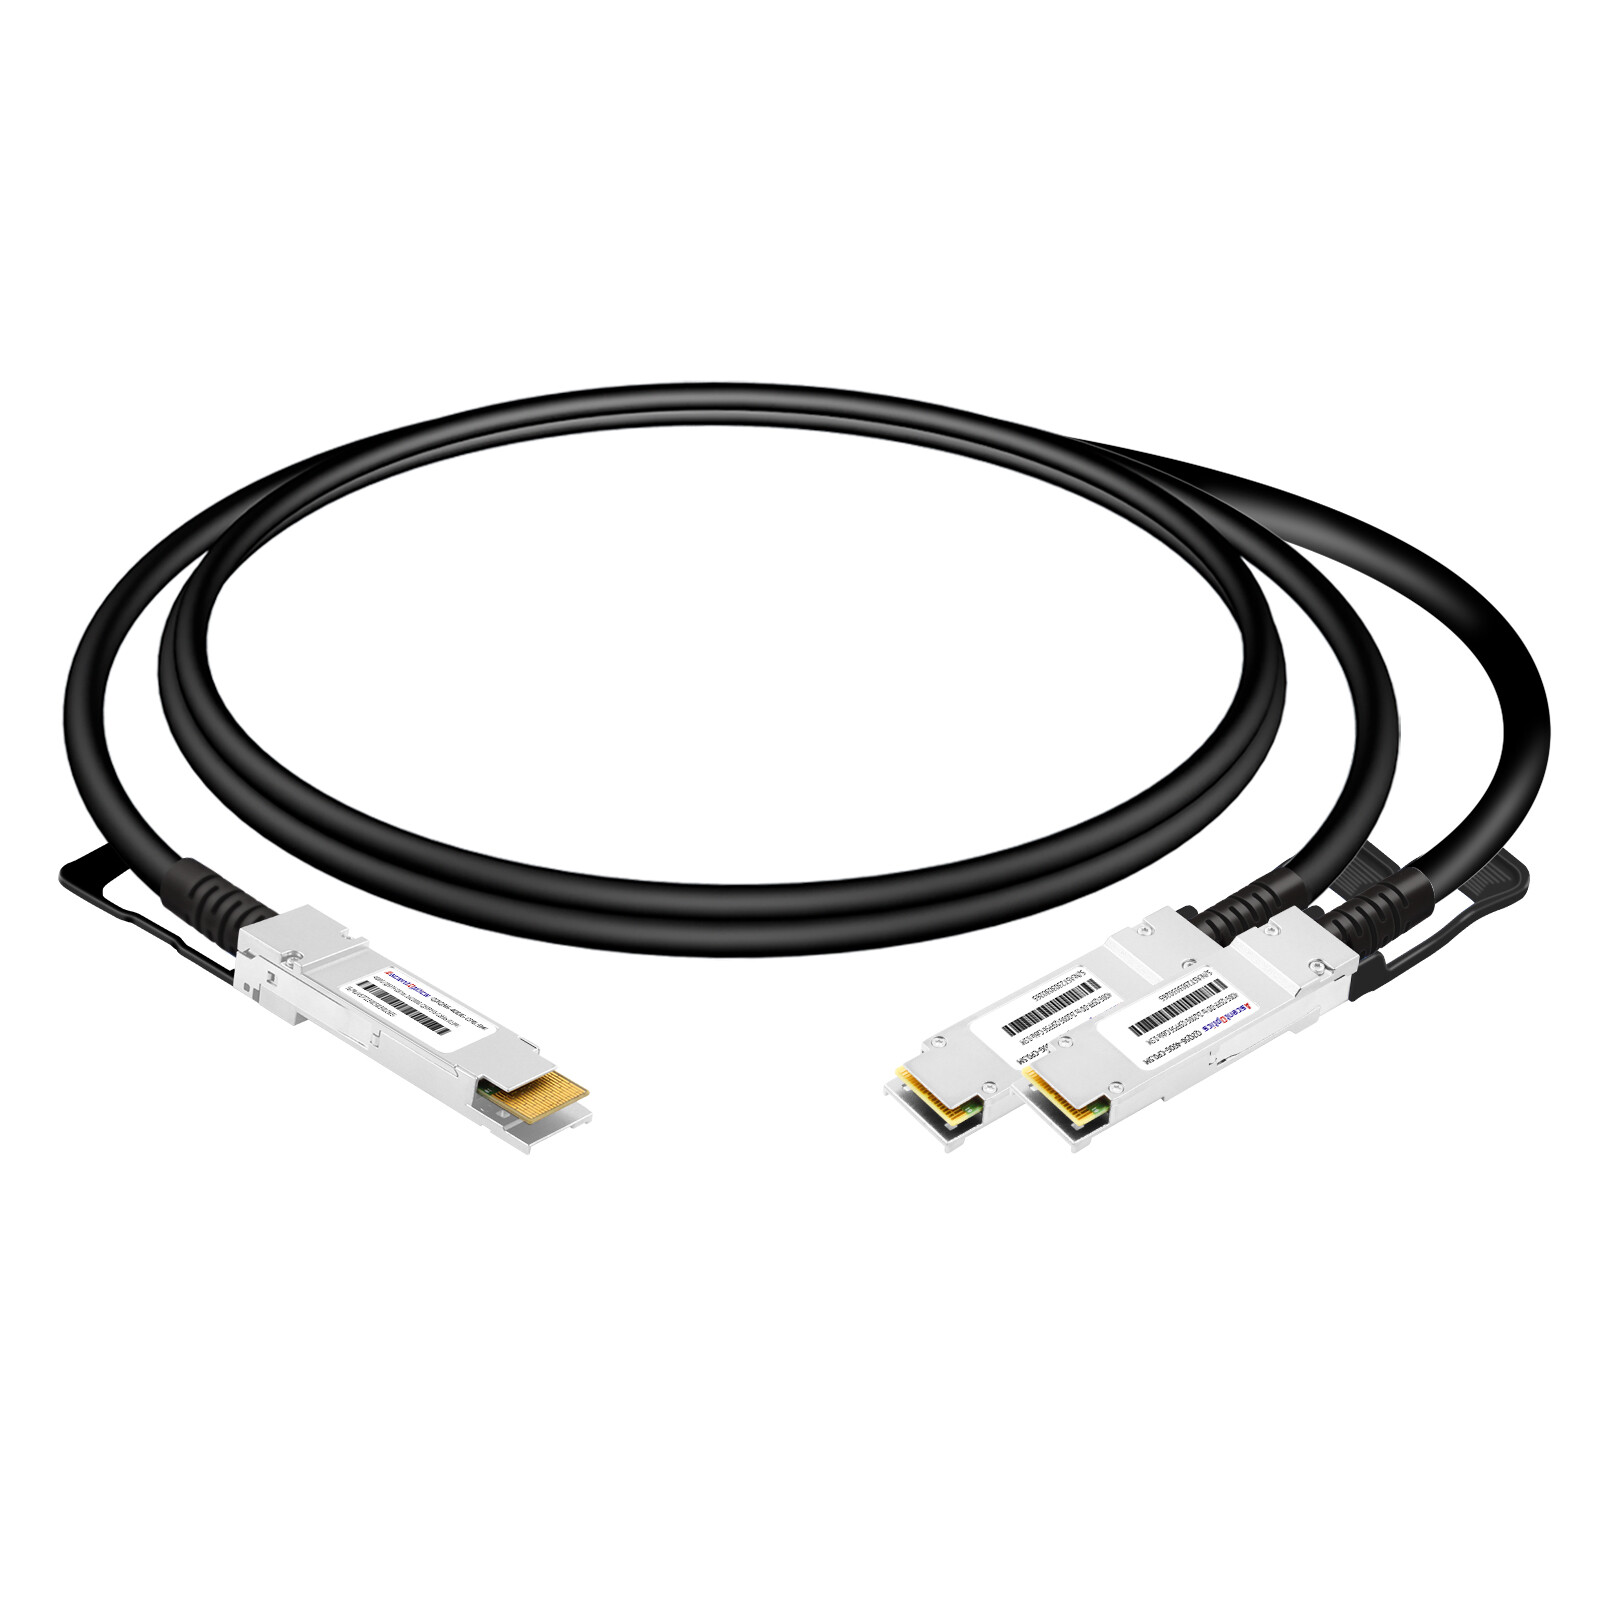 400G QSFP-DD to 2x 200G QSFP56 Copper Breakout Cable,0.5 Meter,Passive